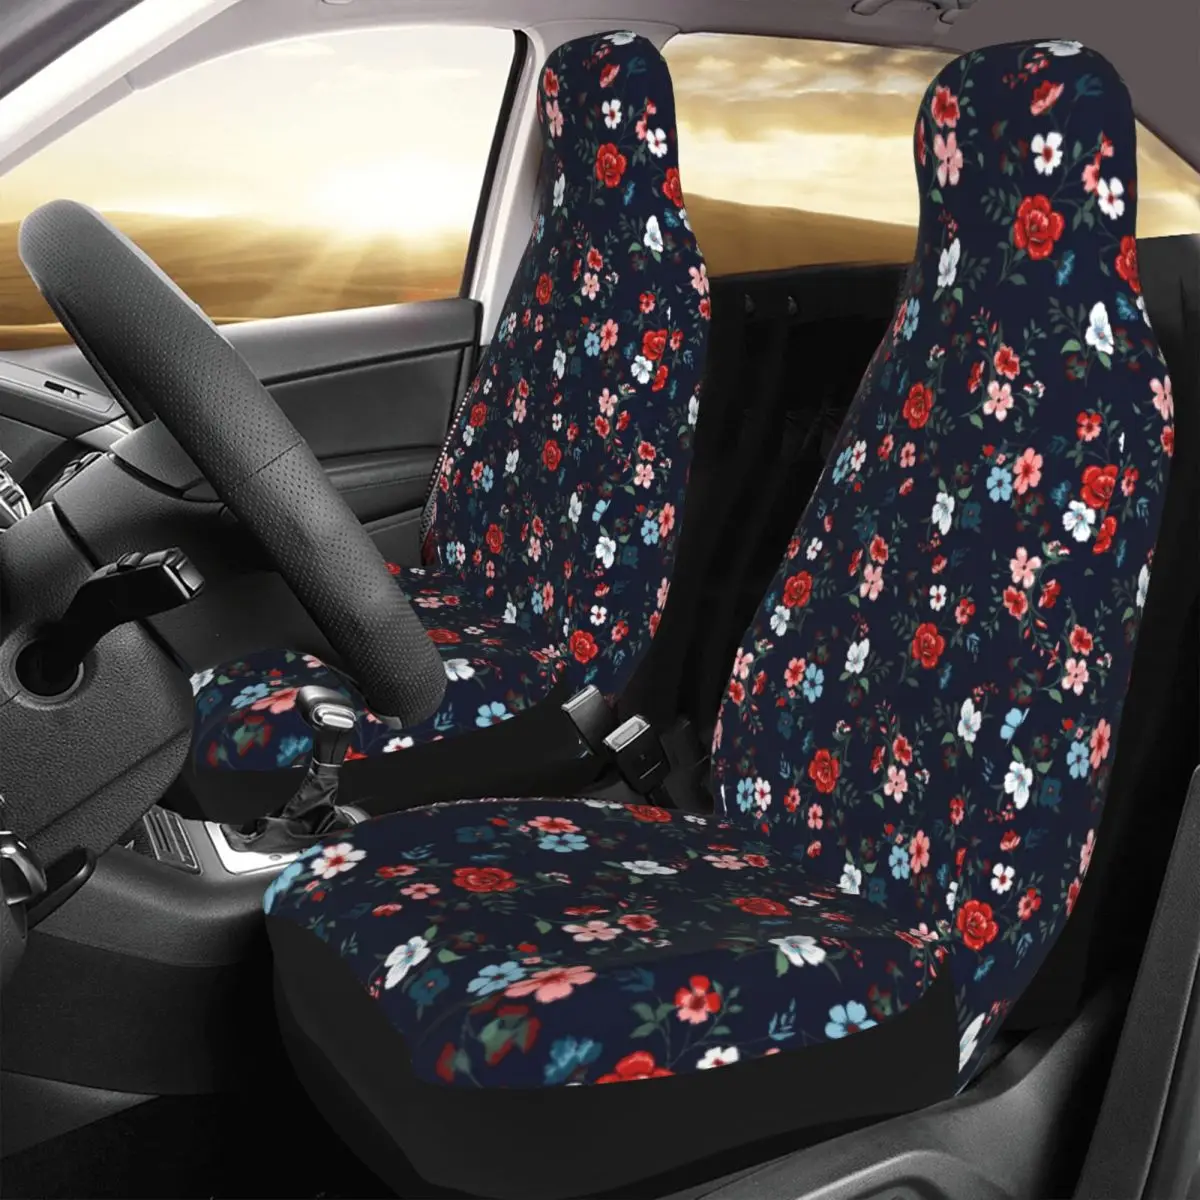 Cute Flower Universal Car Seat Cover Protector Interior Accessories AUTOYOUTH Car Seats Covers Fiber Seat Protector